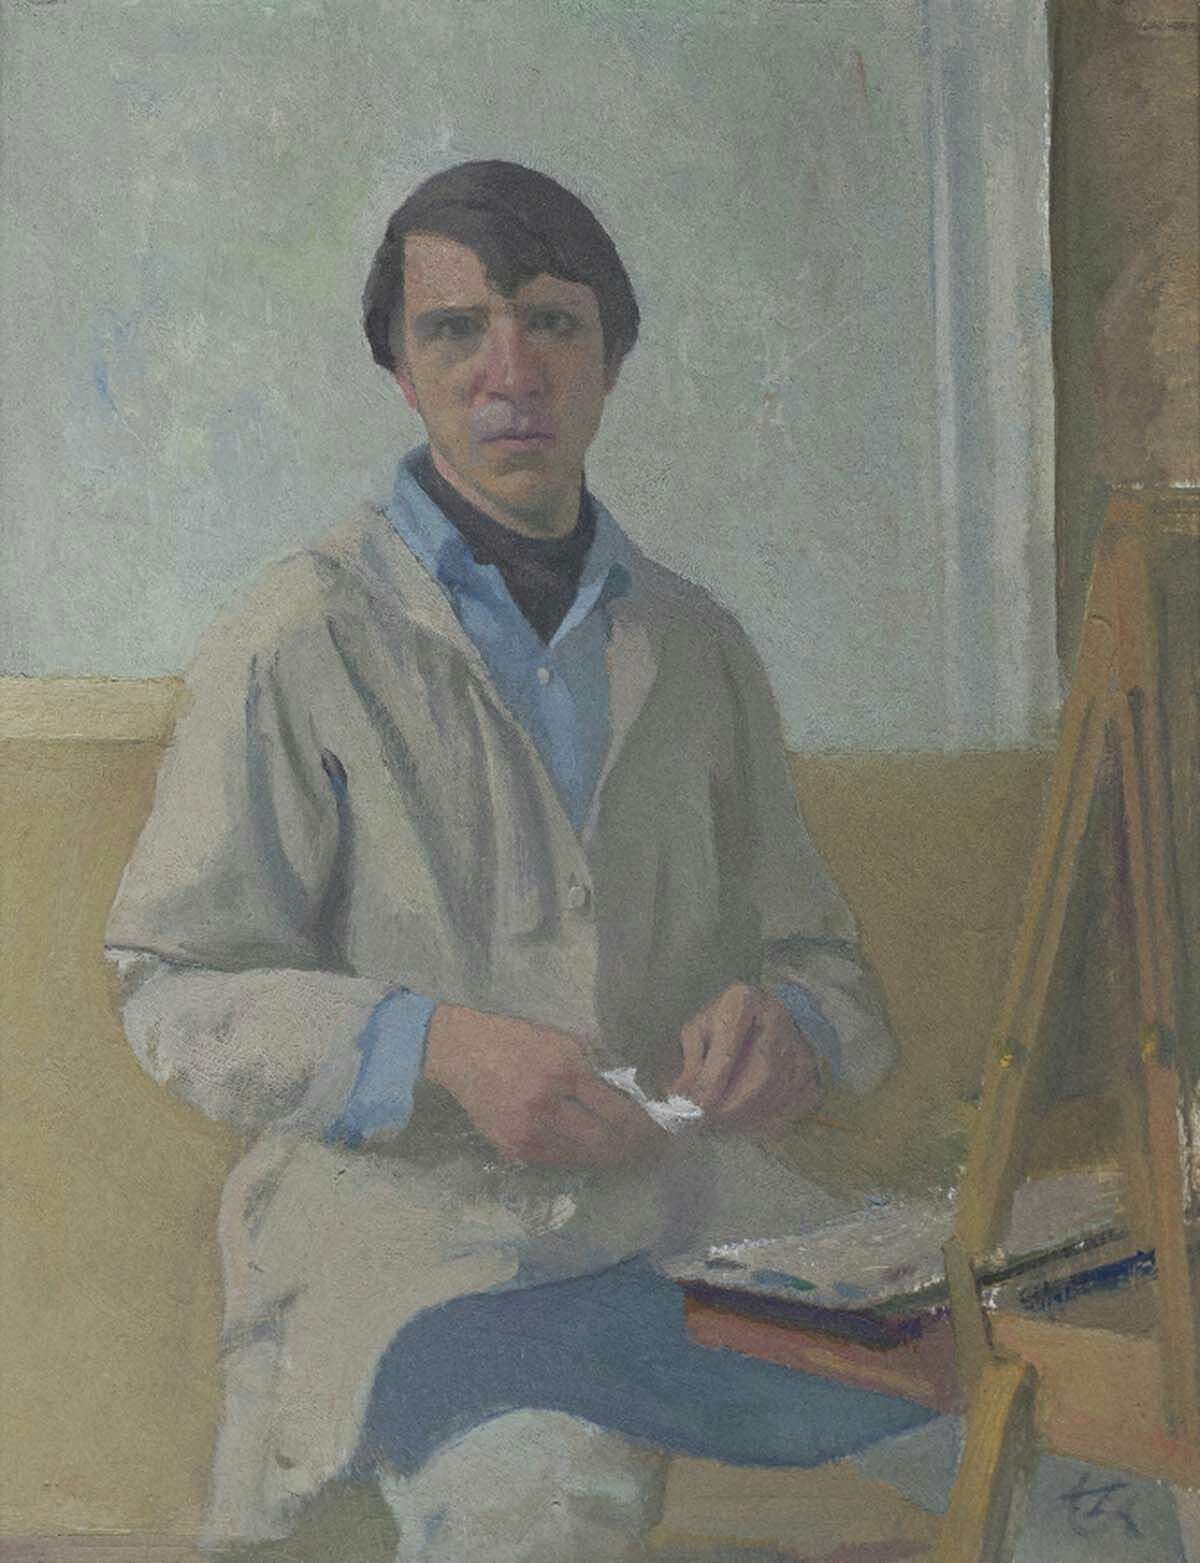 A self-portrait by Lennart Anderson